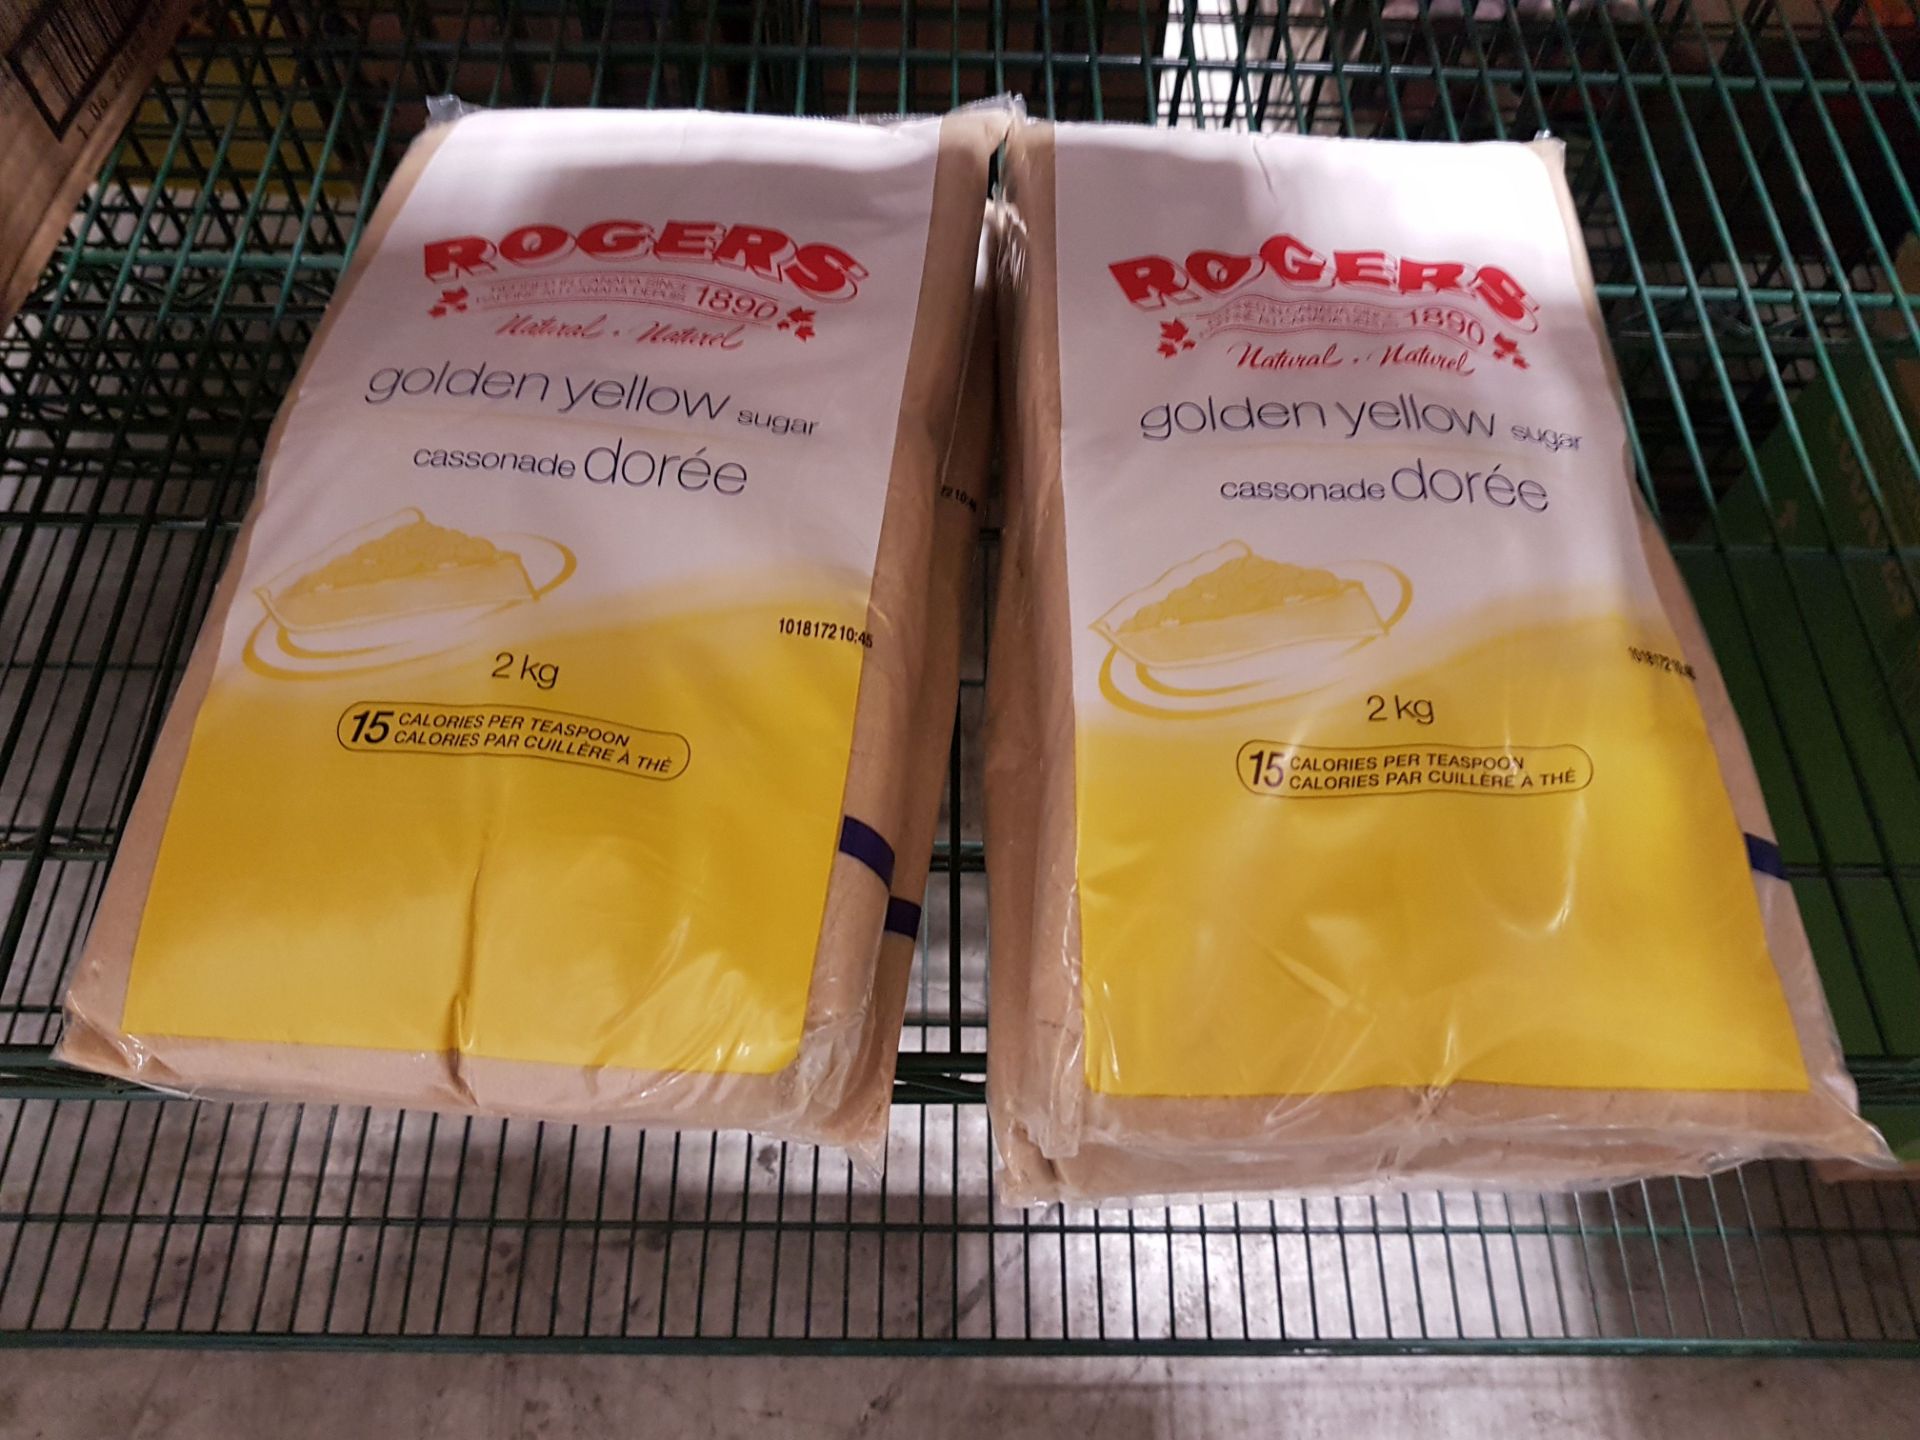 Roger's Golden Yellow Sugar - 4 x 2 kg bags - Image 2 of 2